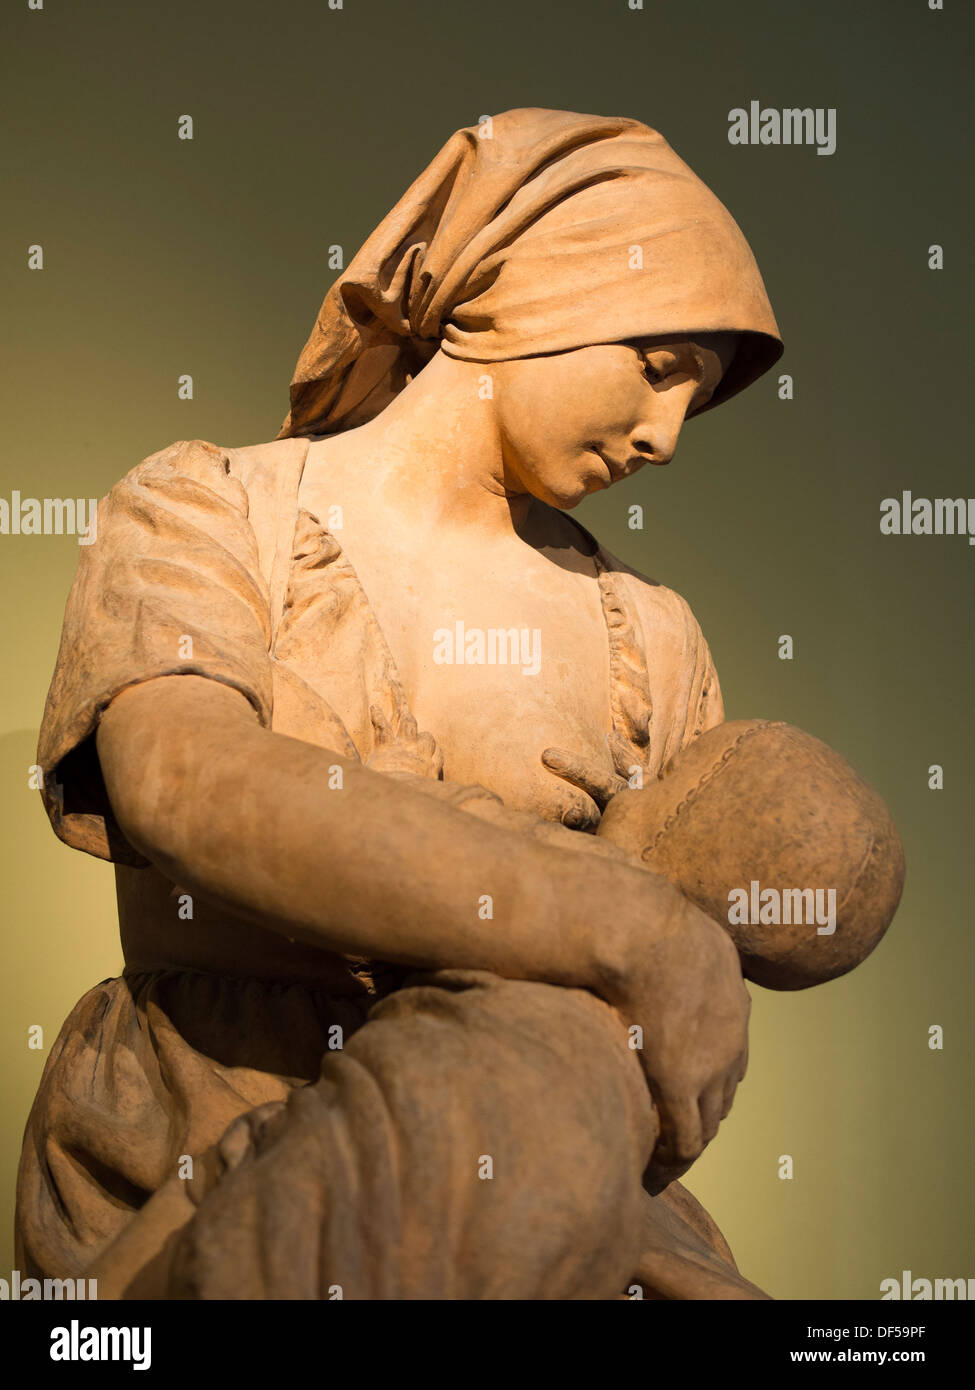 The Victoria and Albert Museum, London - touching sculpture of a peasant woman nursing a baby, by Aime-Jules Dalou Stock Photo